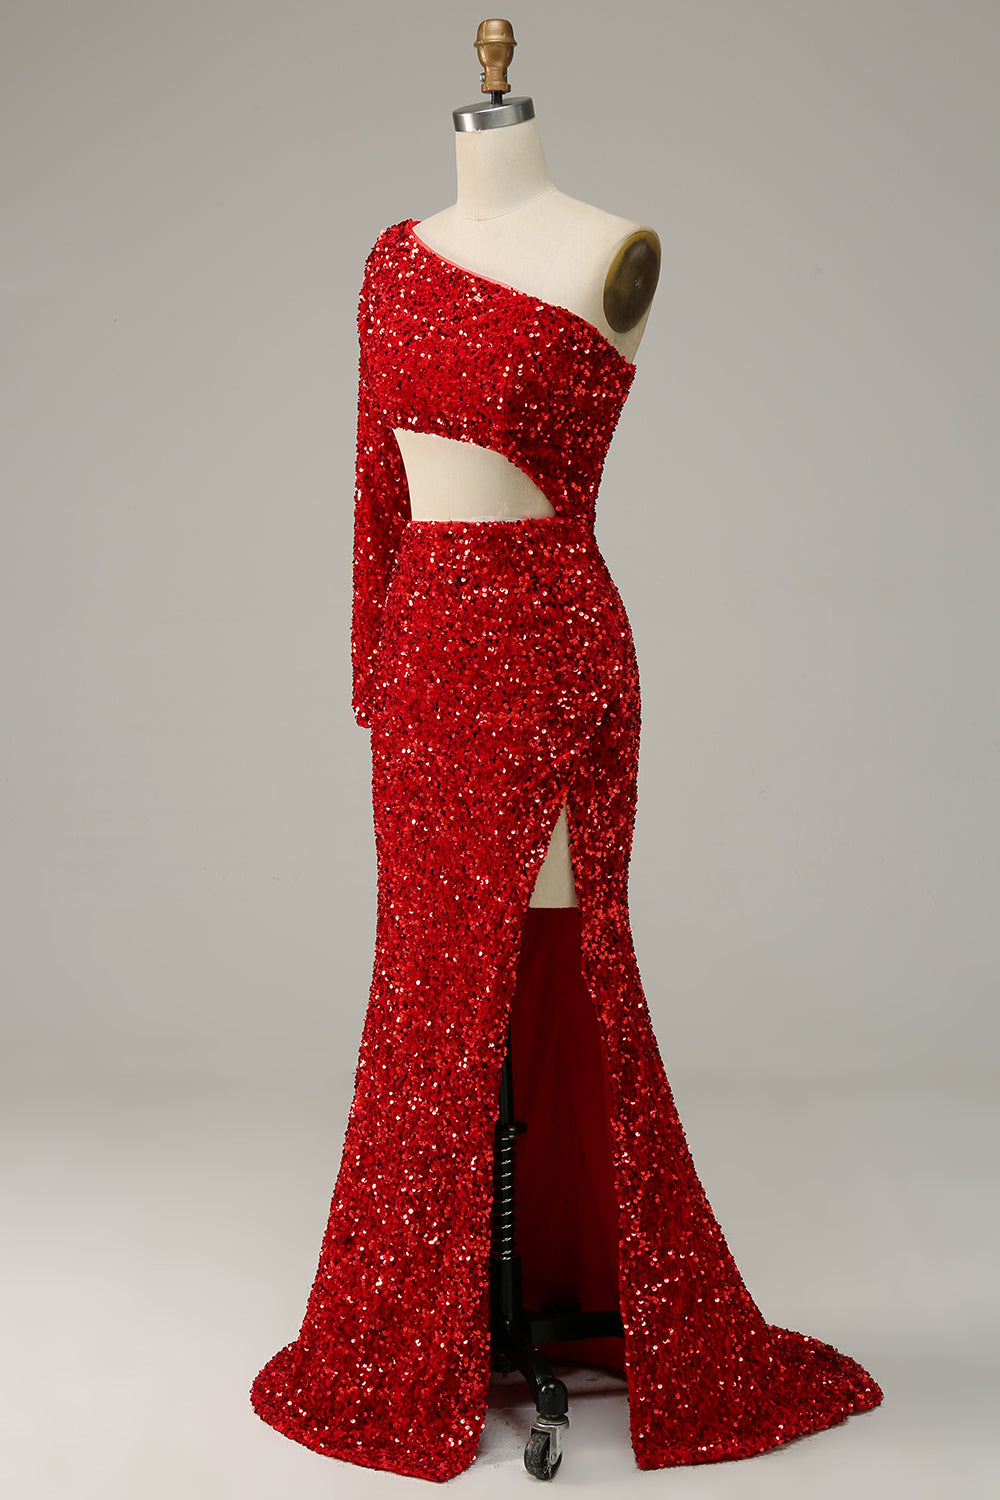 Mermaid One Shoulder Red Sequins Cut Out Prom Dress with Slit Front